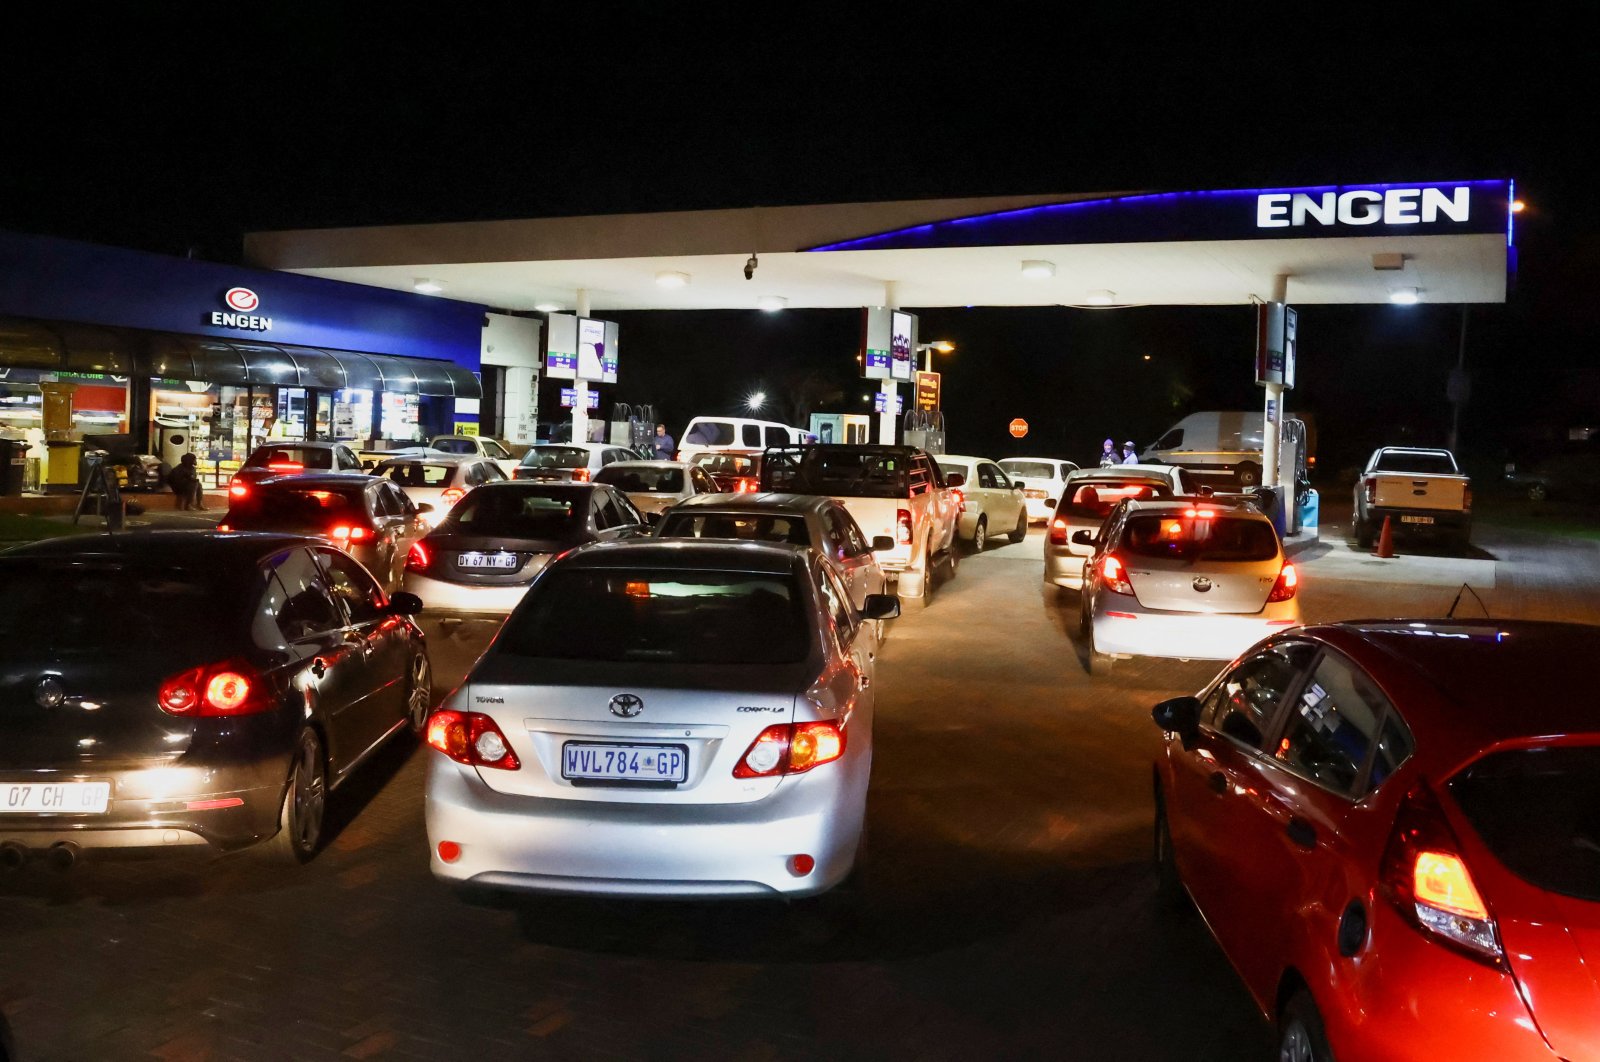 Motorists queue in their cars to buy fuel ahead of a petrol price increase effective from midnight, in Johannesburg, South Africa, May 31, 2022. (Reuters Photo)